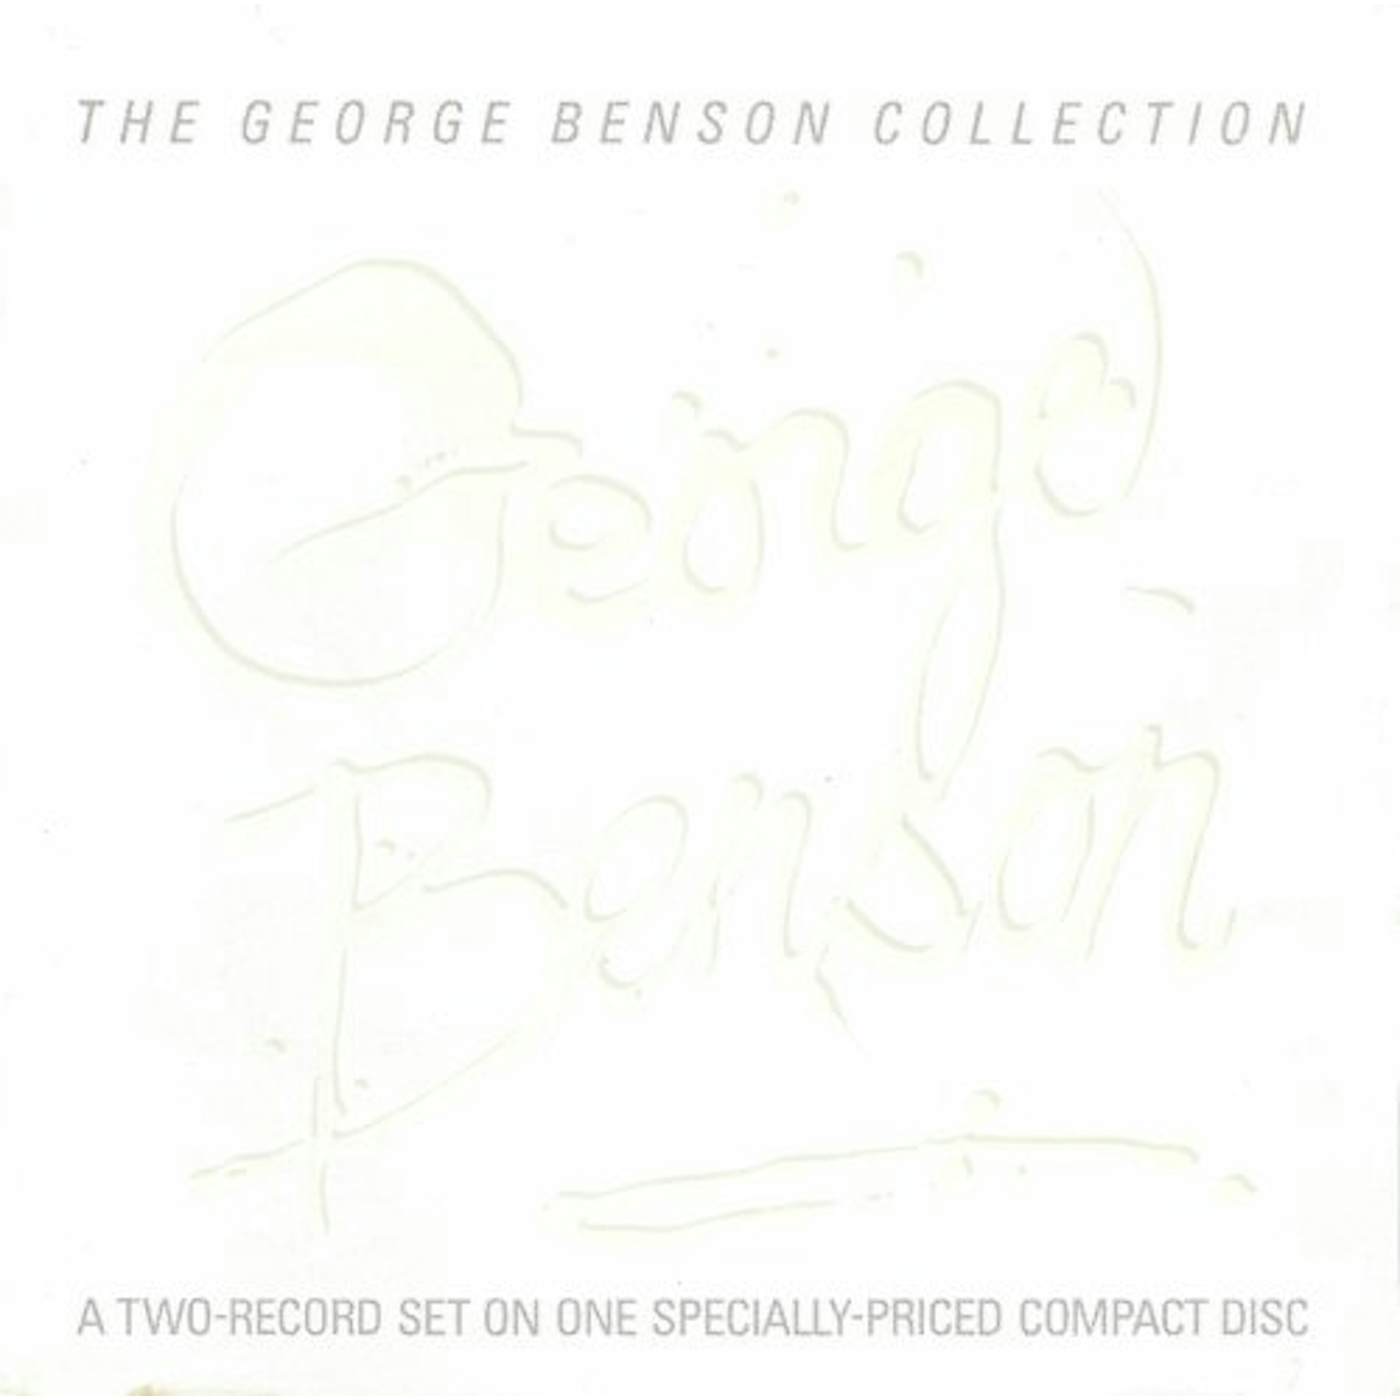 George Benson COLLECTION CD